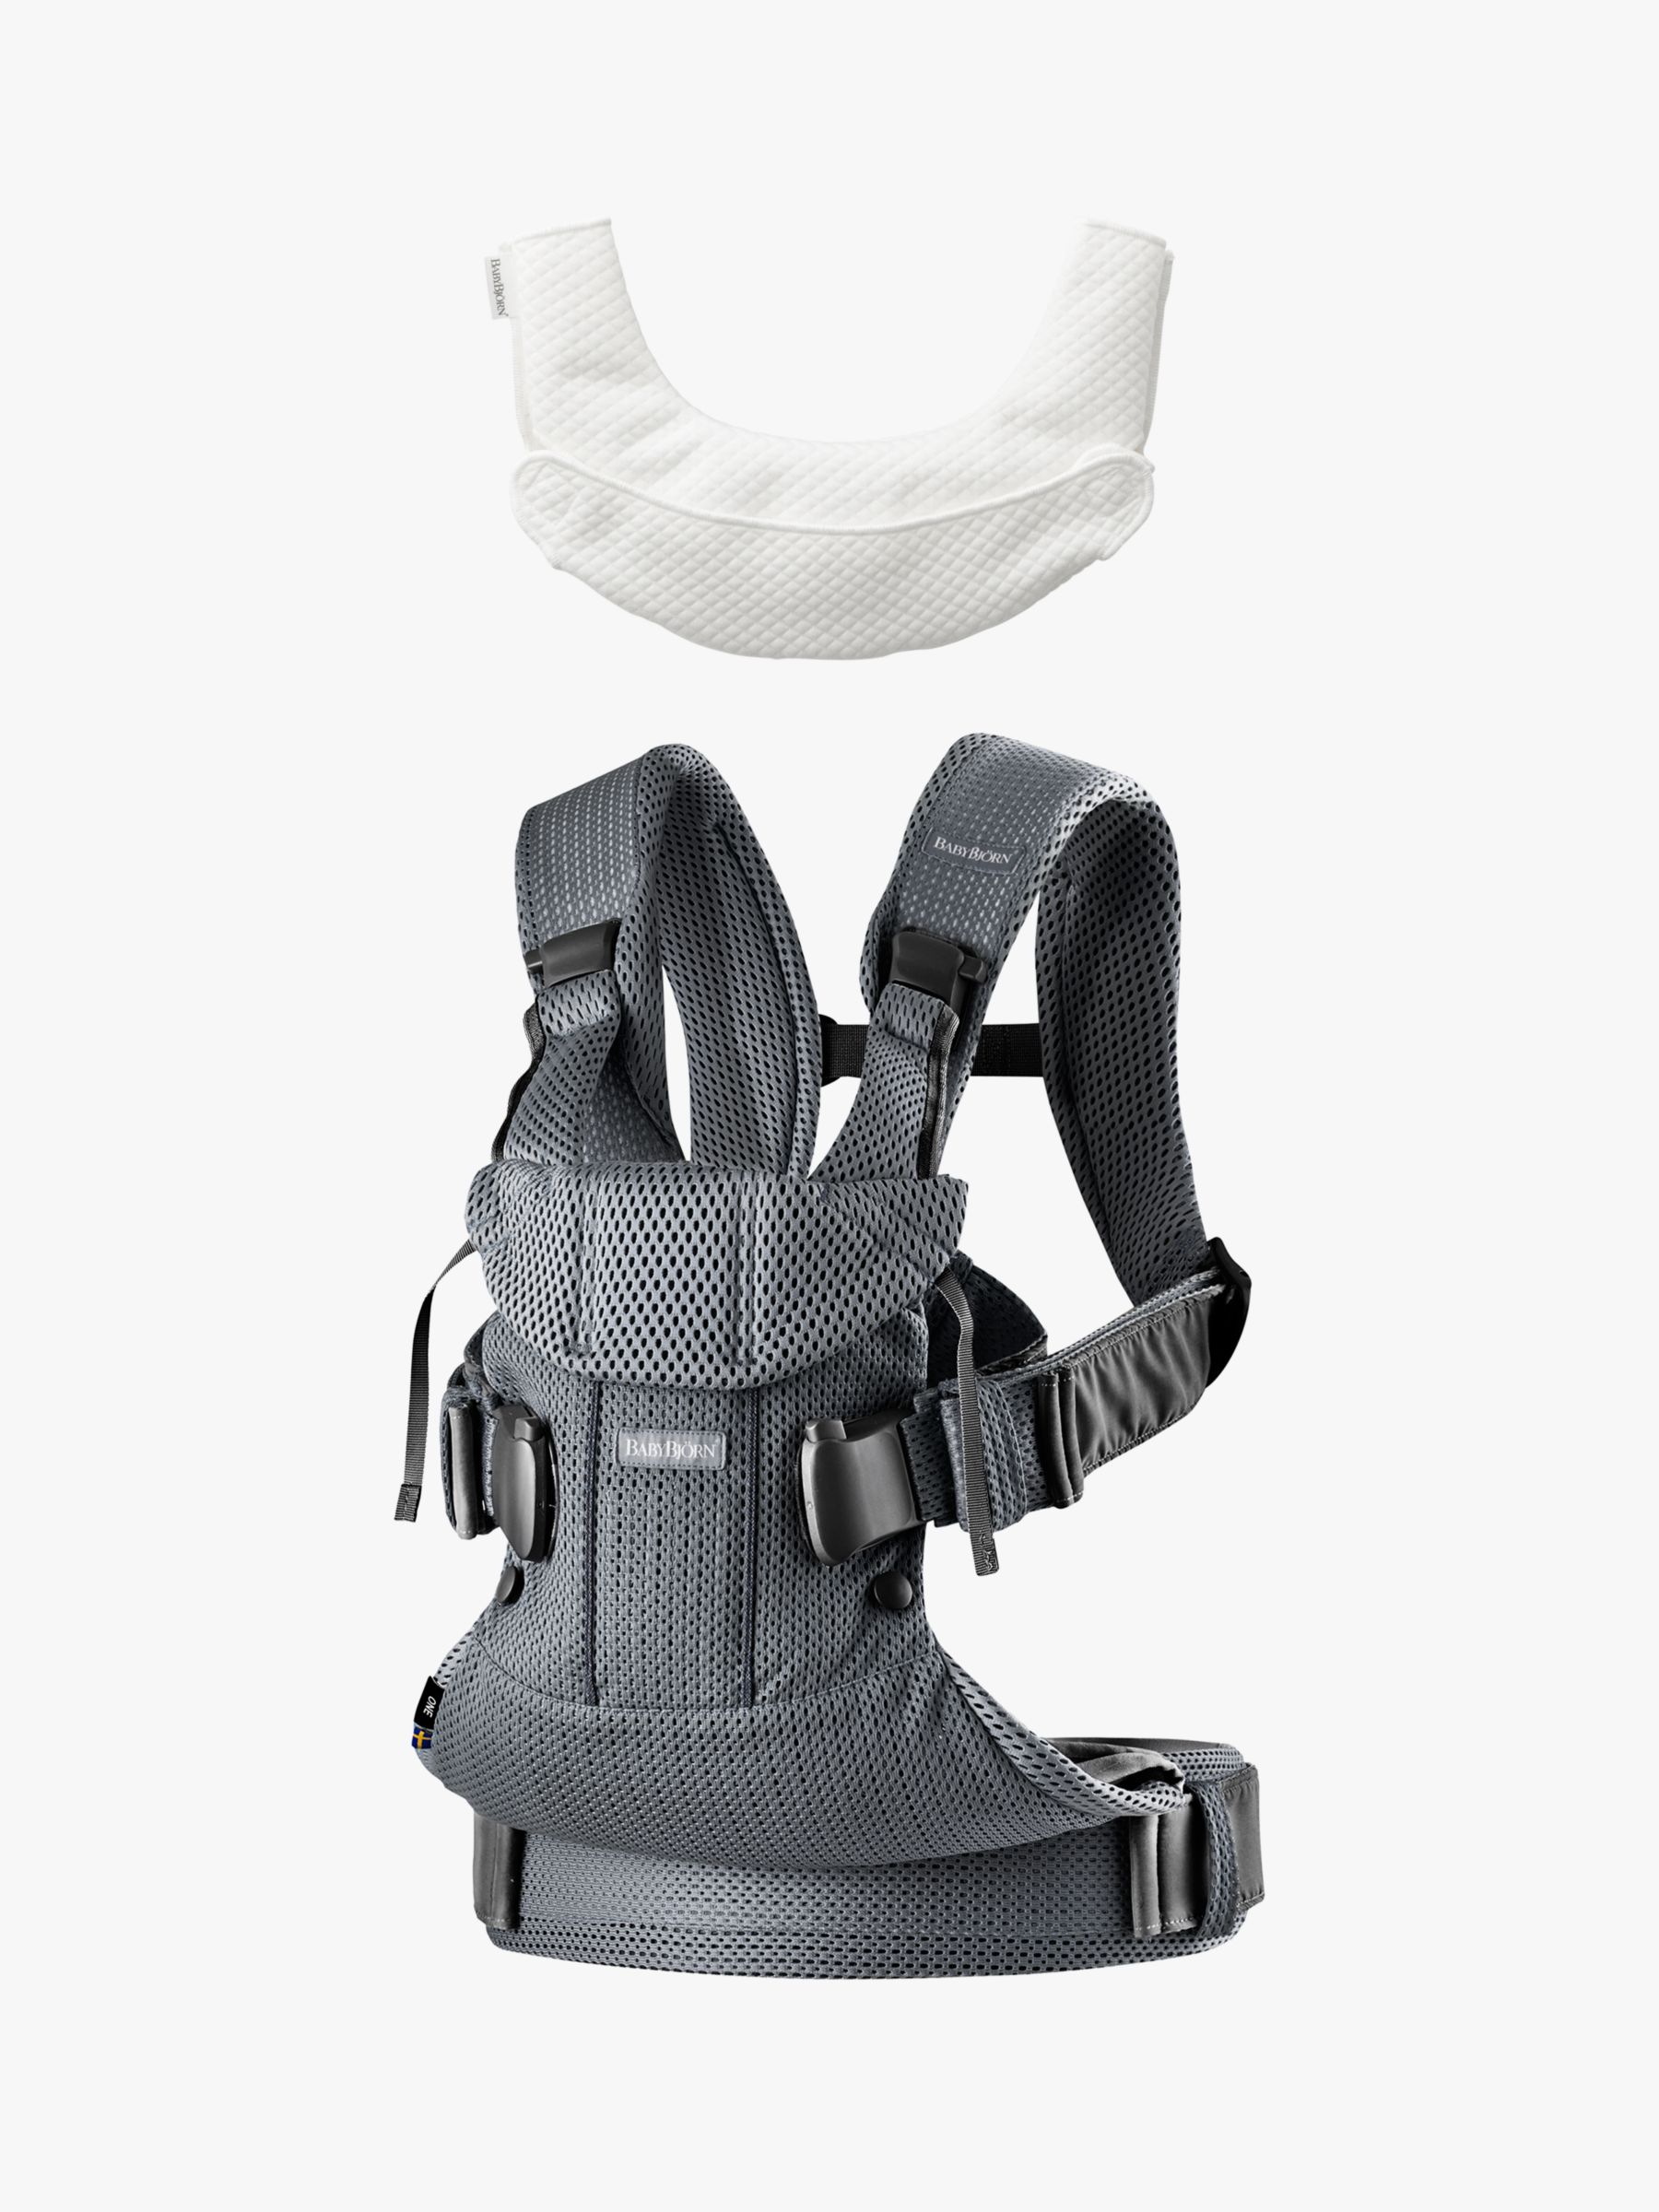 BabyBjörn Anthracite One Air Baby Carrier 2018 and Teething Bib bundle